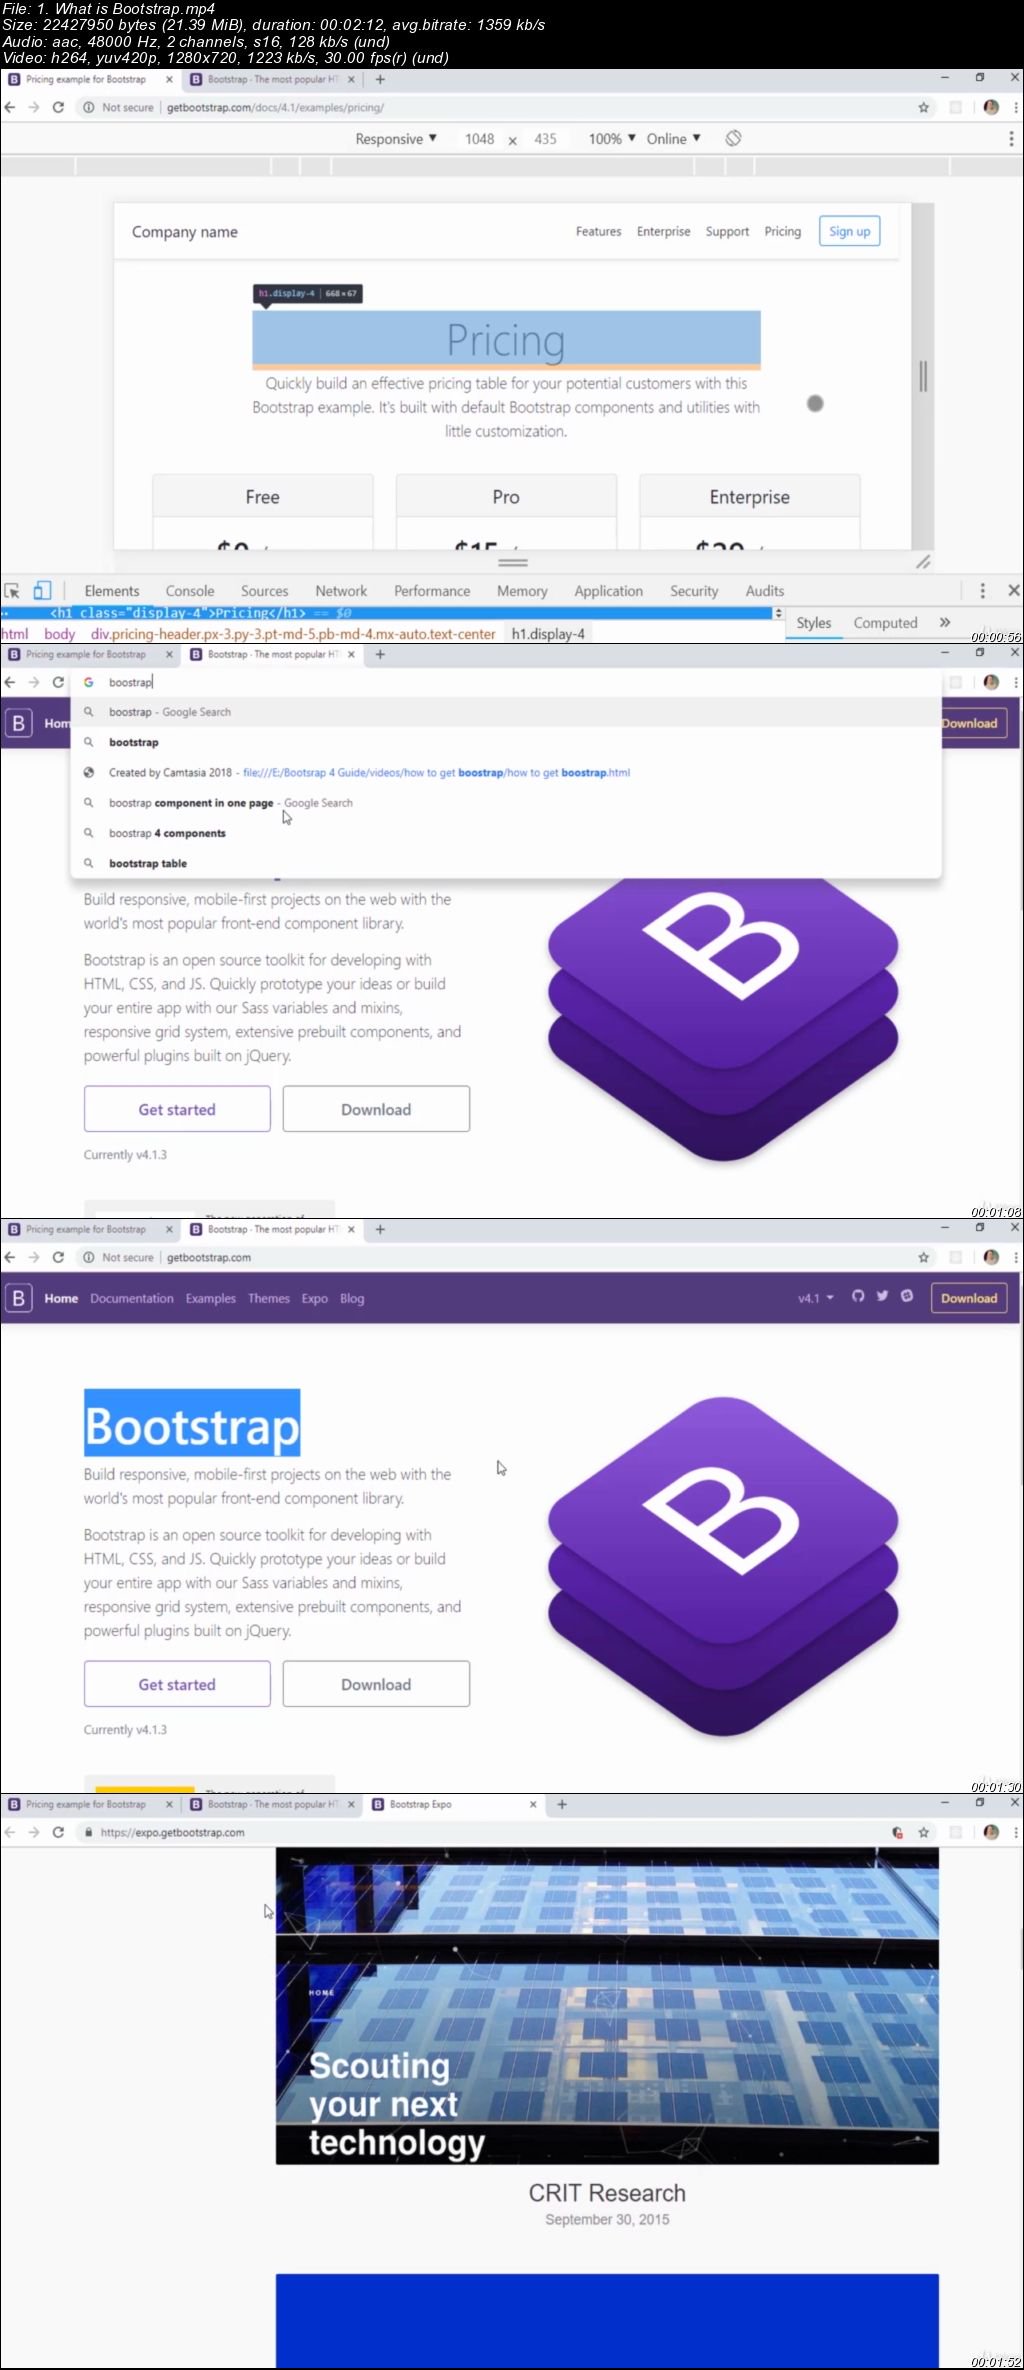  Bootstrap 4 - The Complete Guide to Learn Bootstrap 4 